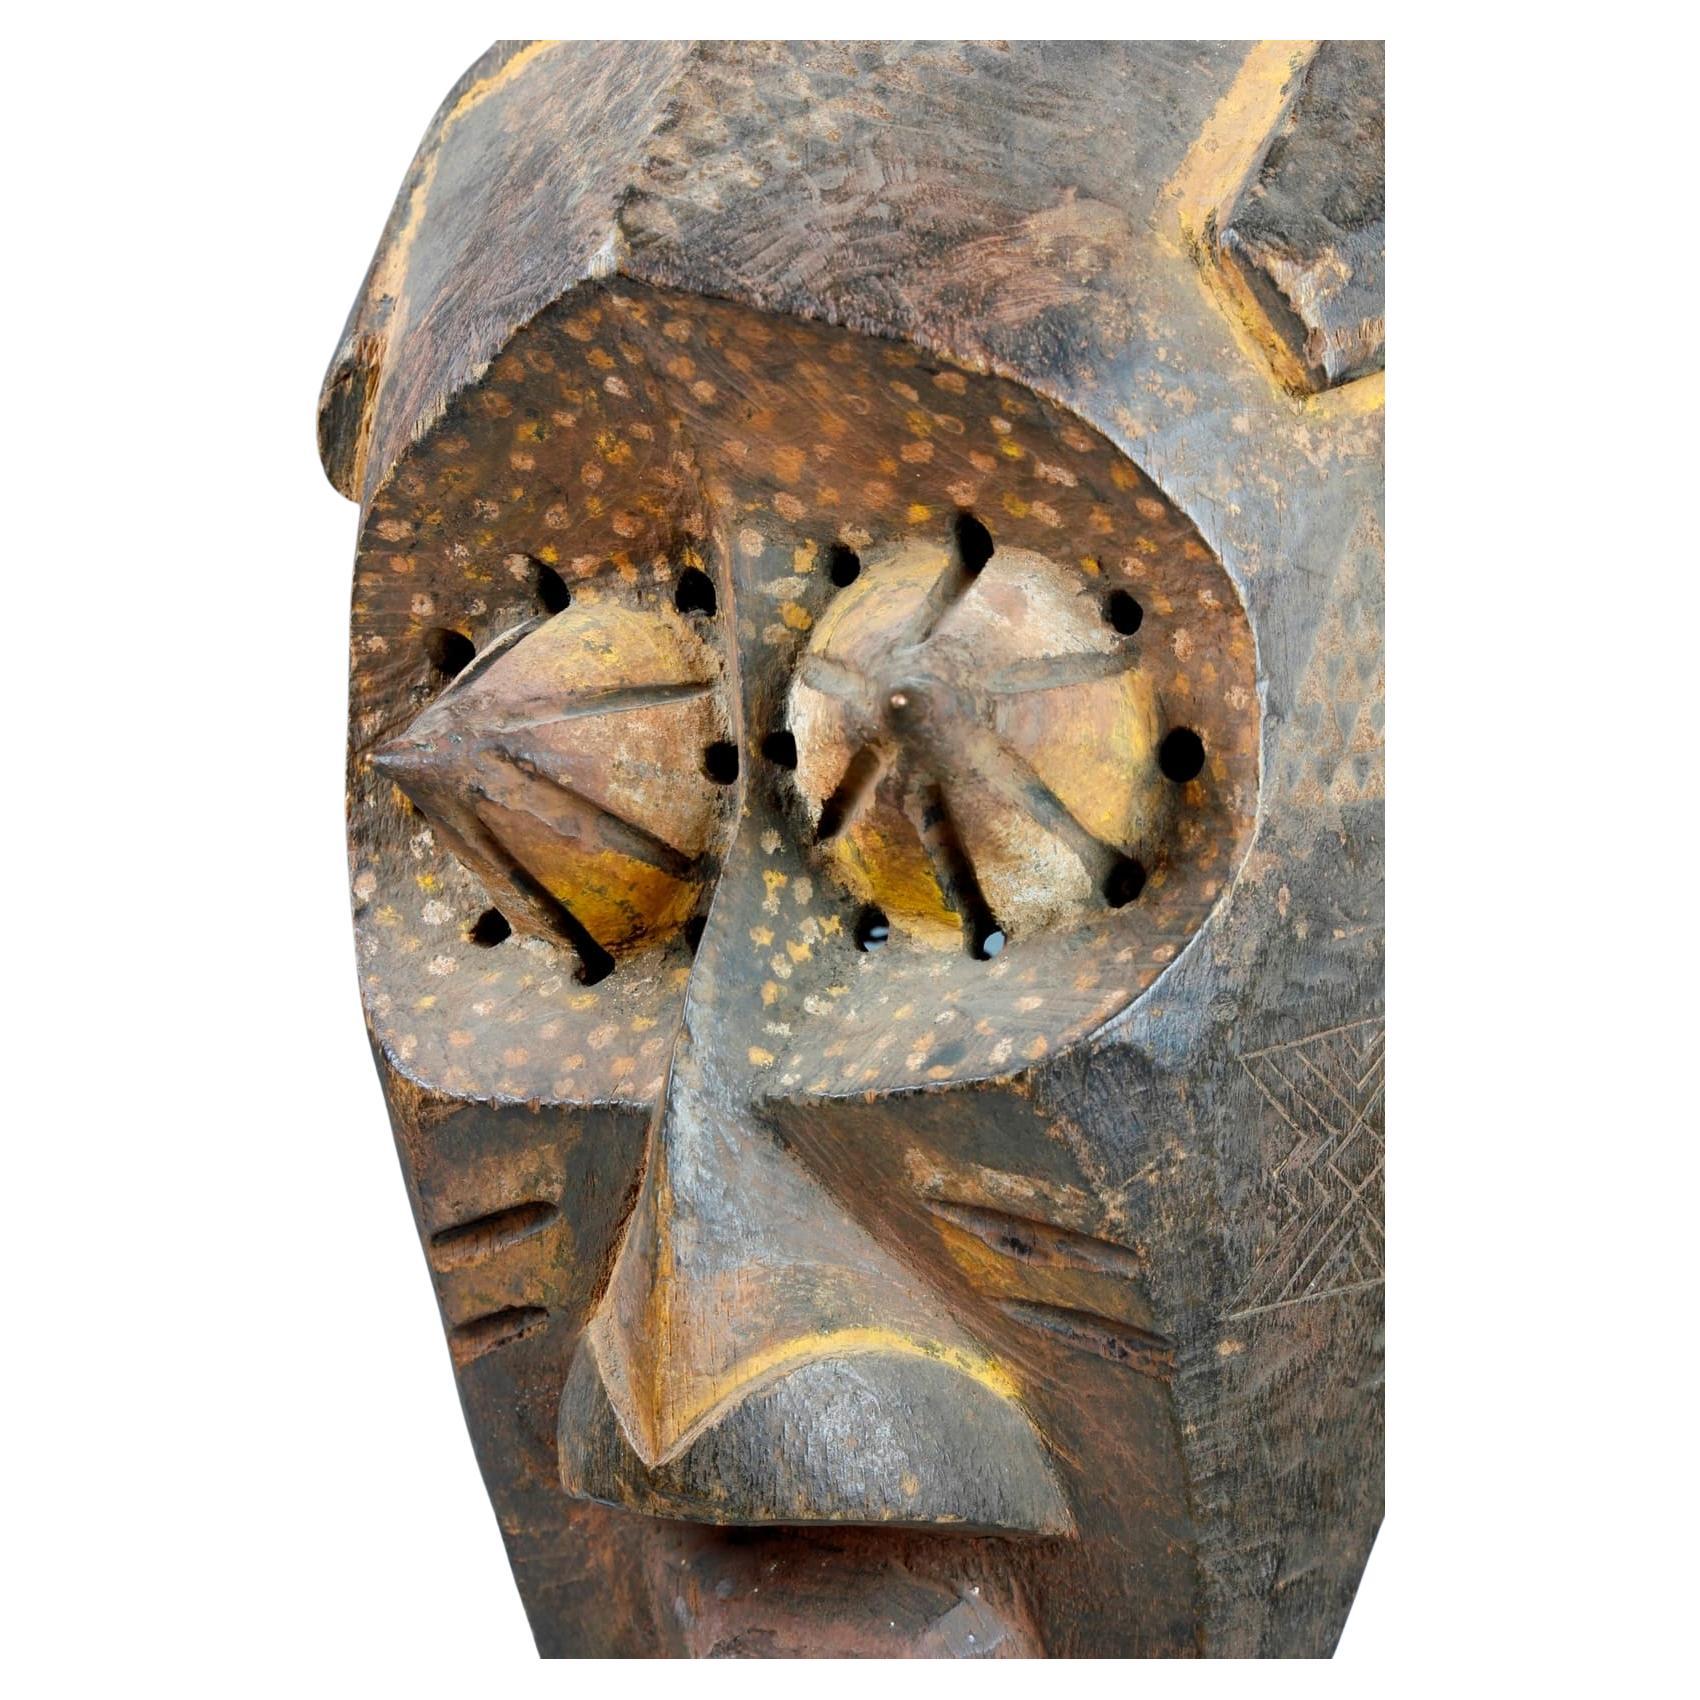 This striking early twentieth-century mask, from the Kete culture in the Democratic Republic of the Congo, previously belonged to the private collection of Penn Kent, the former Director of the Bank of England. The mask has been finely carved with a